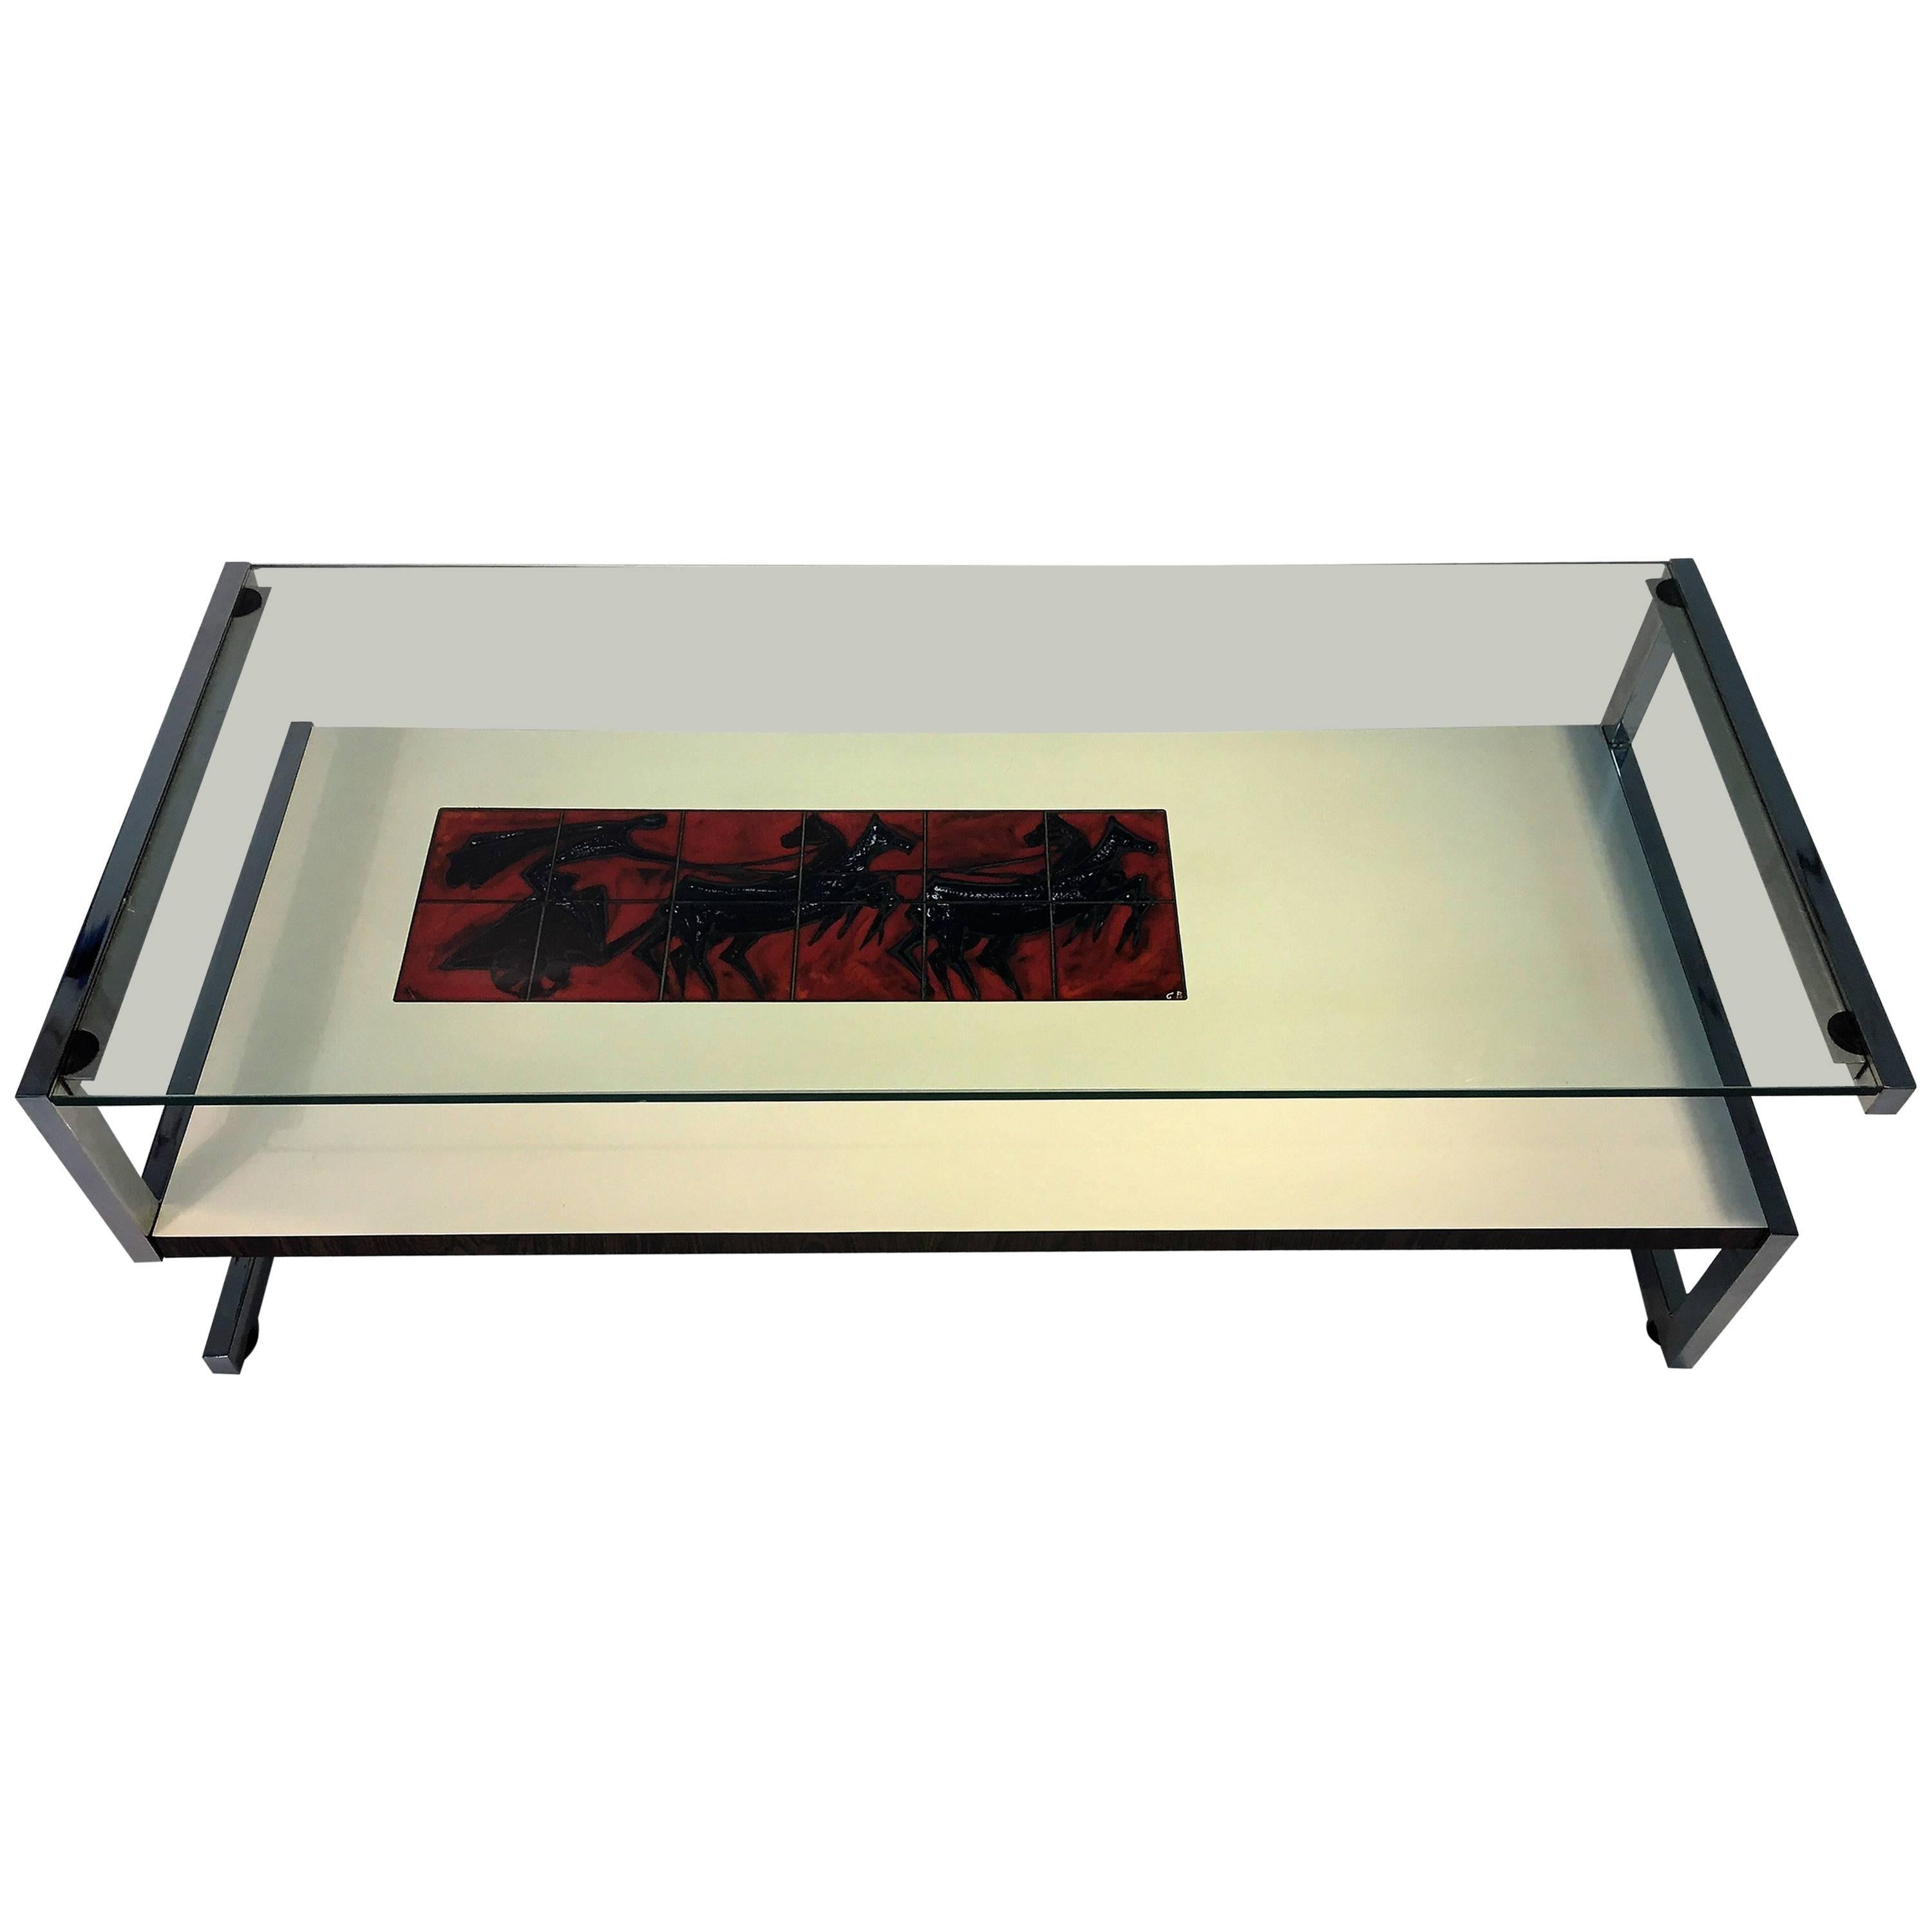 Amazing Italian Modernist Tile and Laminate Chrome Frame Coffee Table For Sale